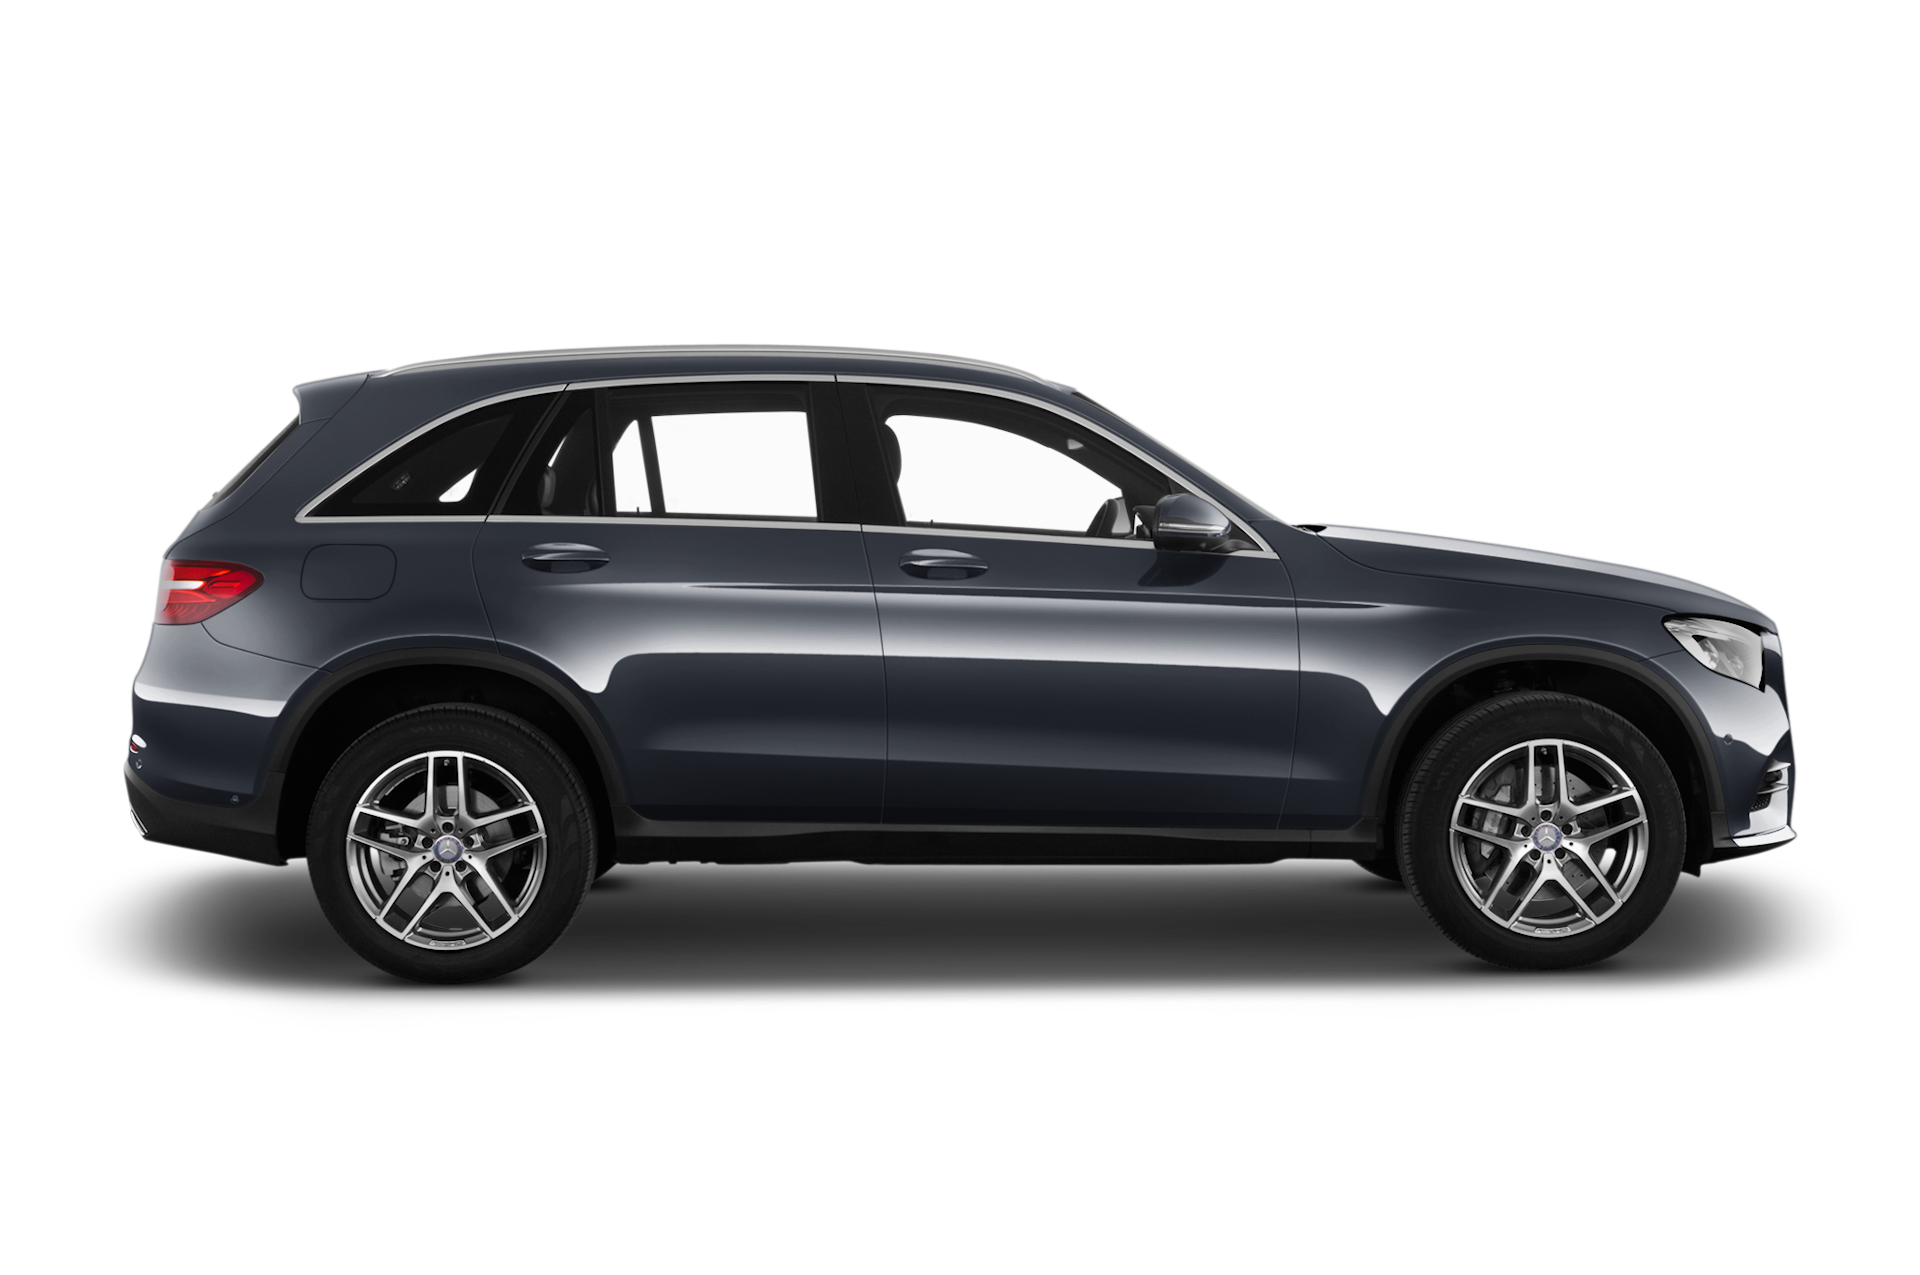 Mercedes GLC SUV Lease deals from £470pm carwow